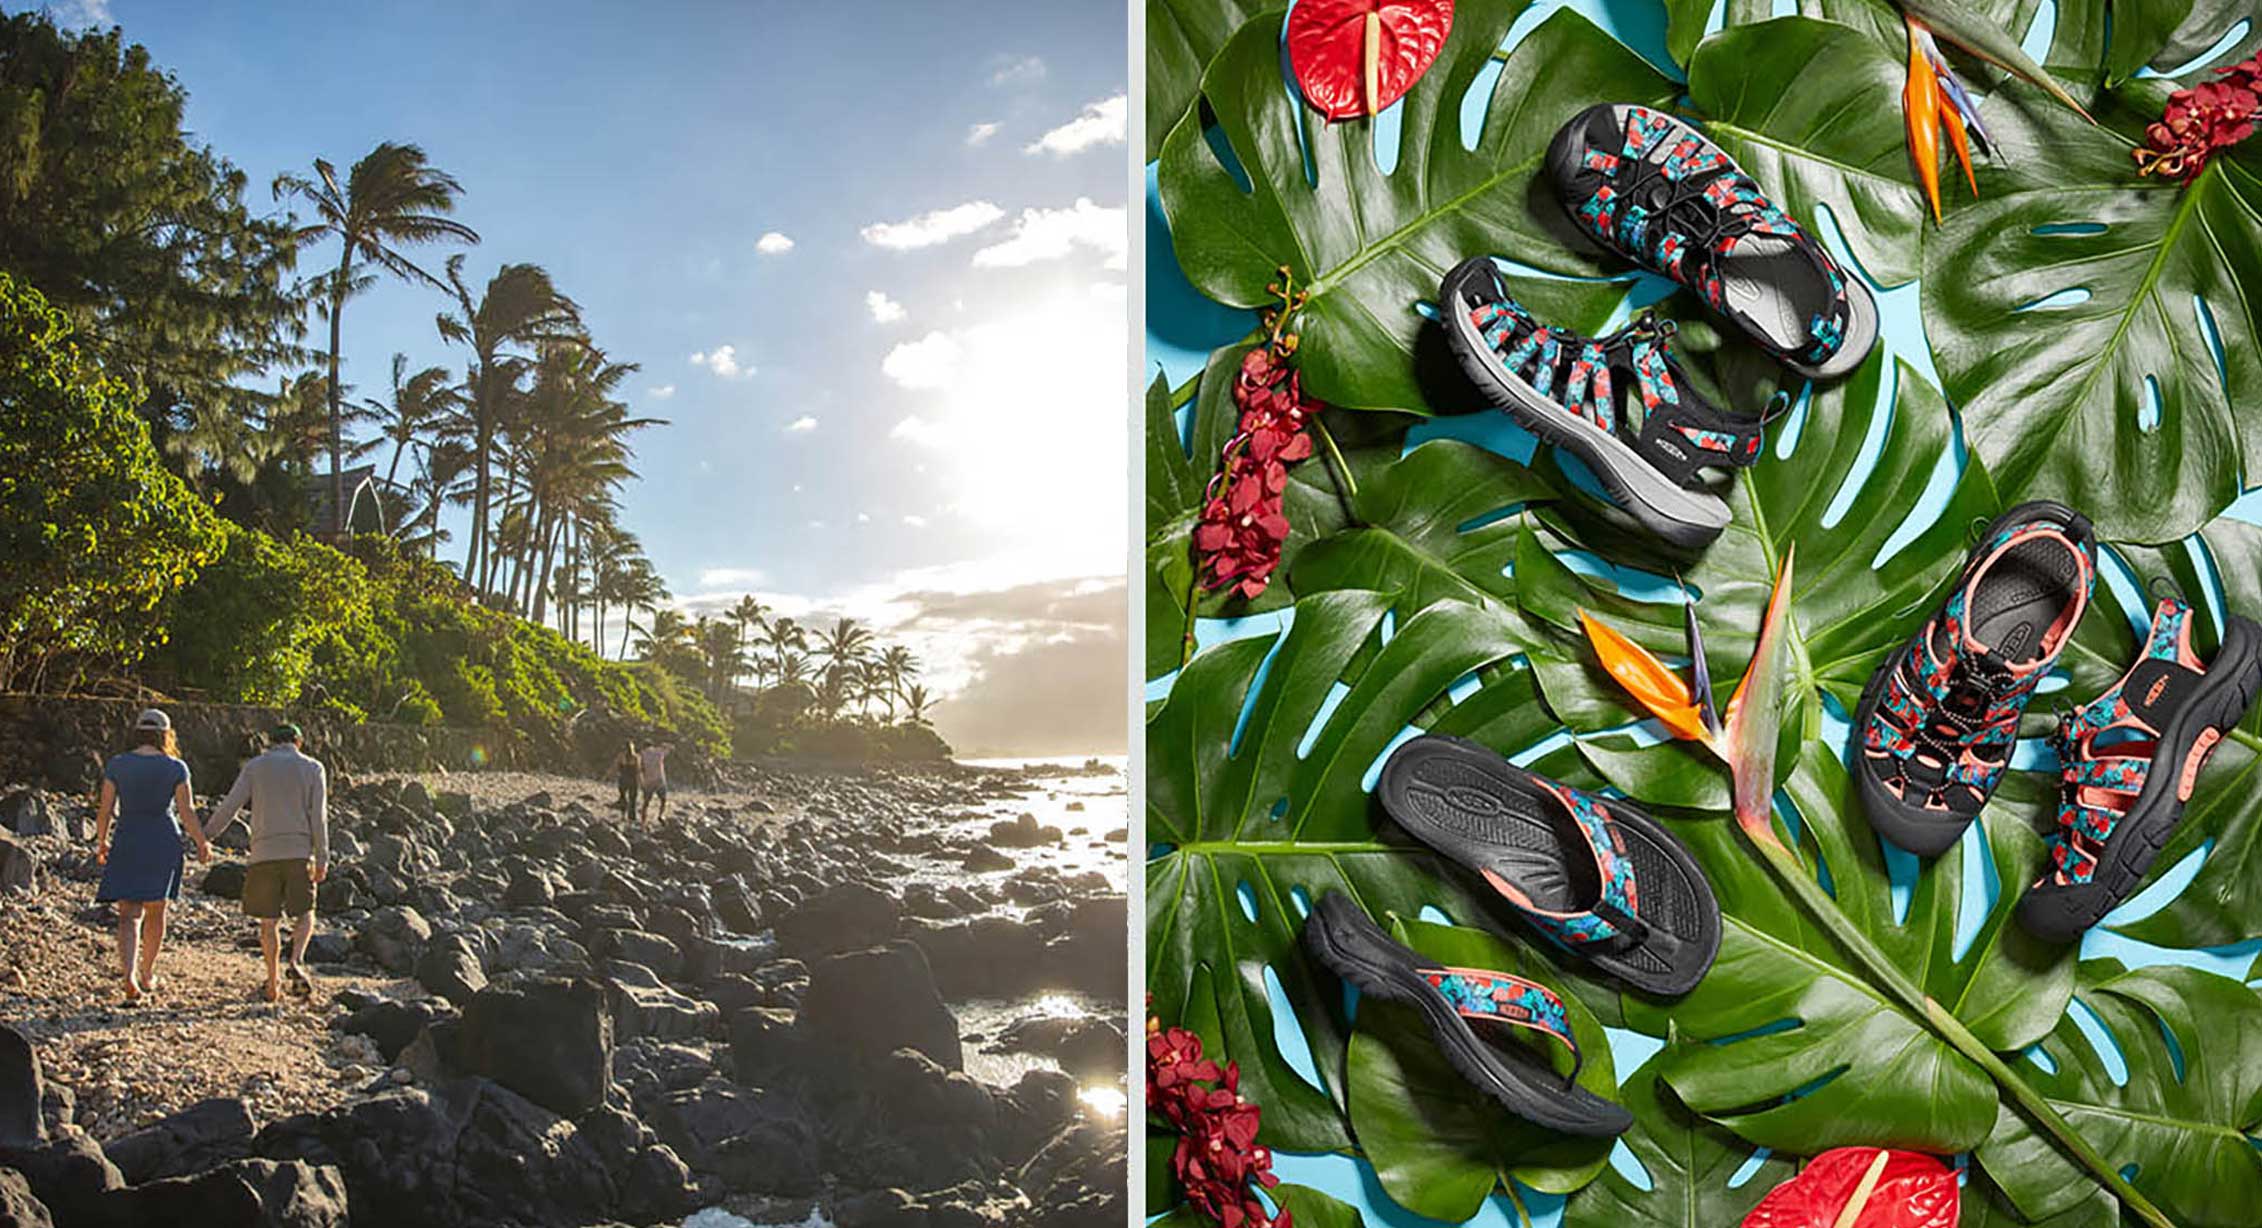 Water sandals fit into Aloha attire